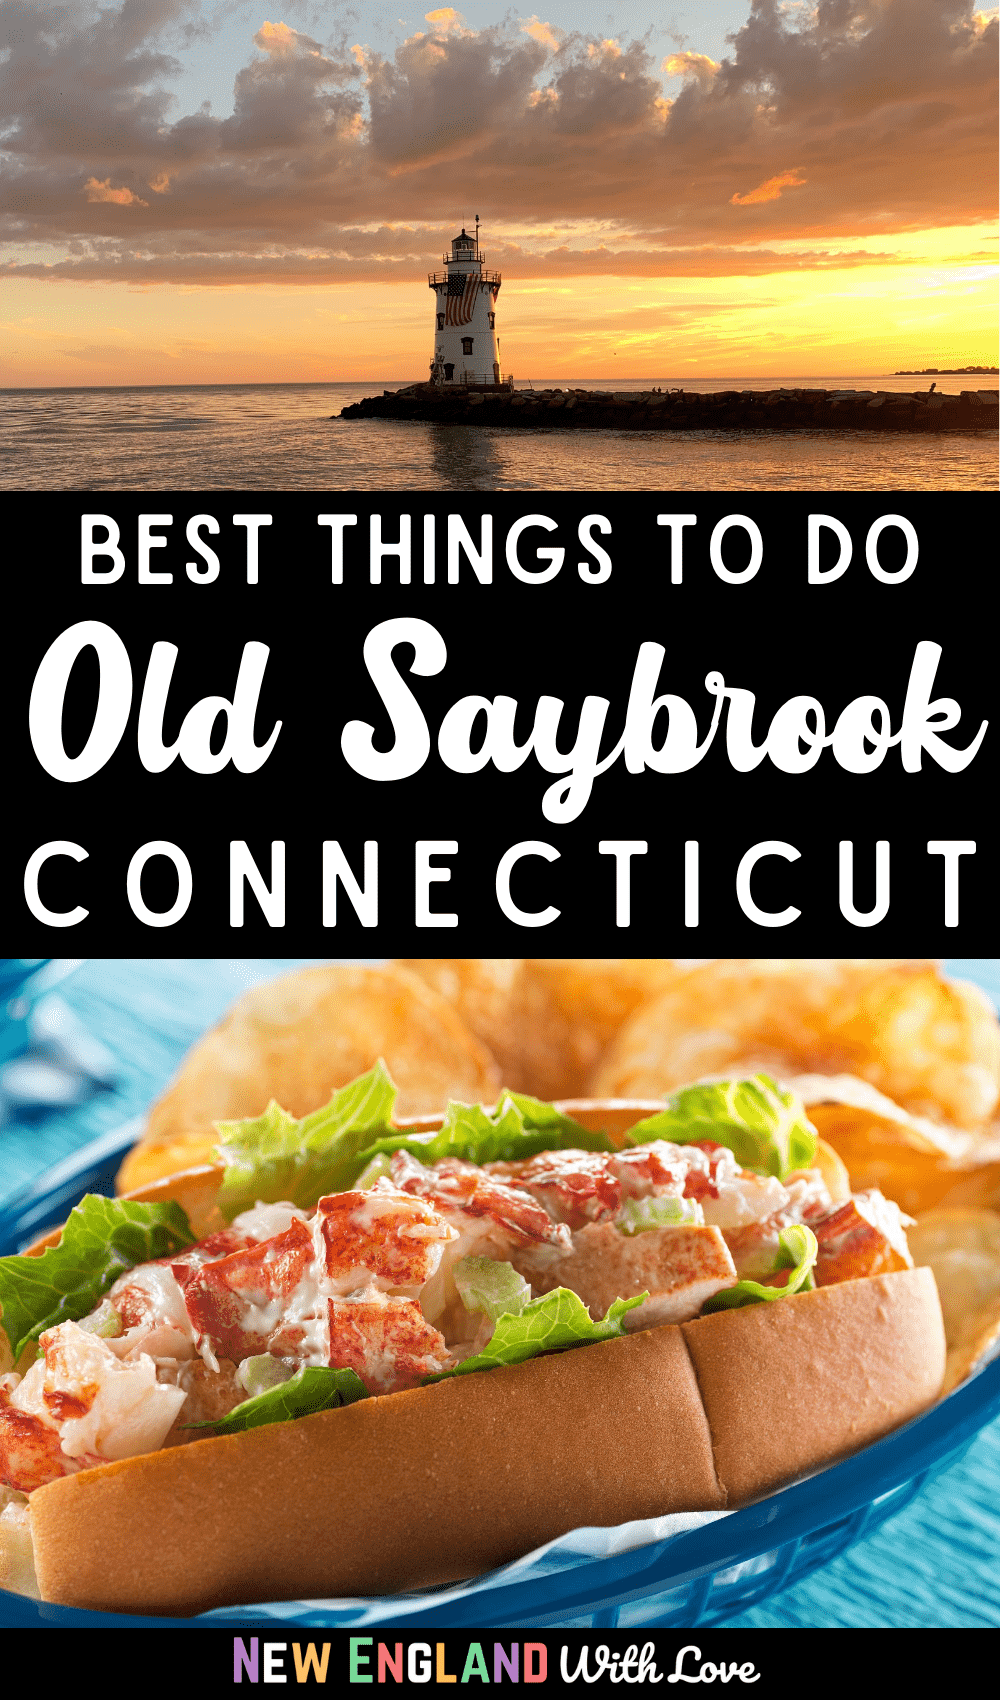 Pinterest graphic reading "Best Things To Do Old Saybrook Connecticut"